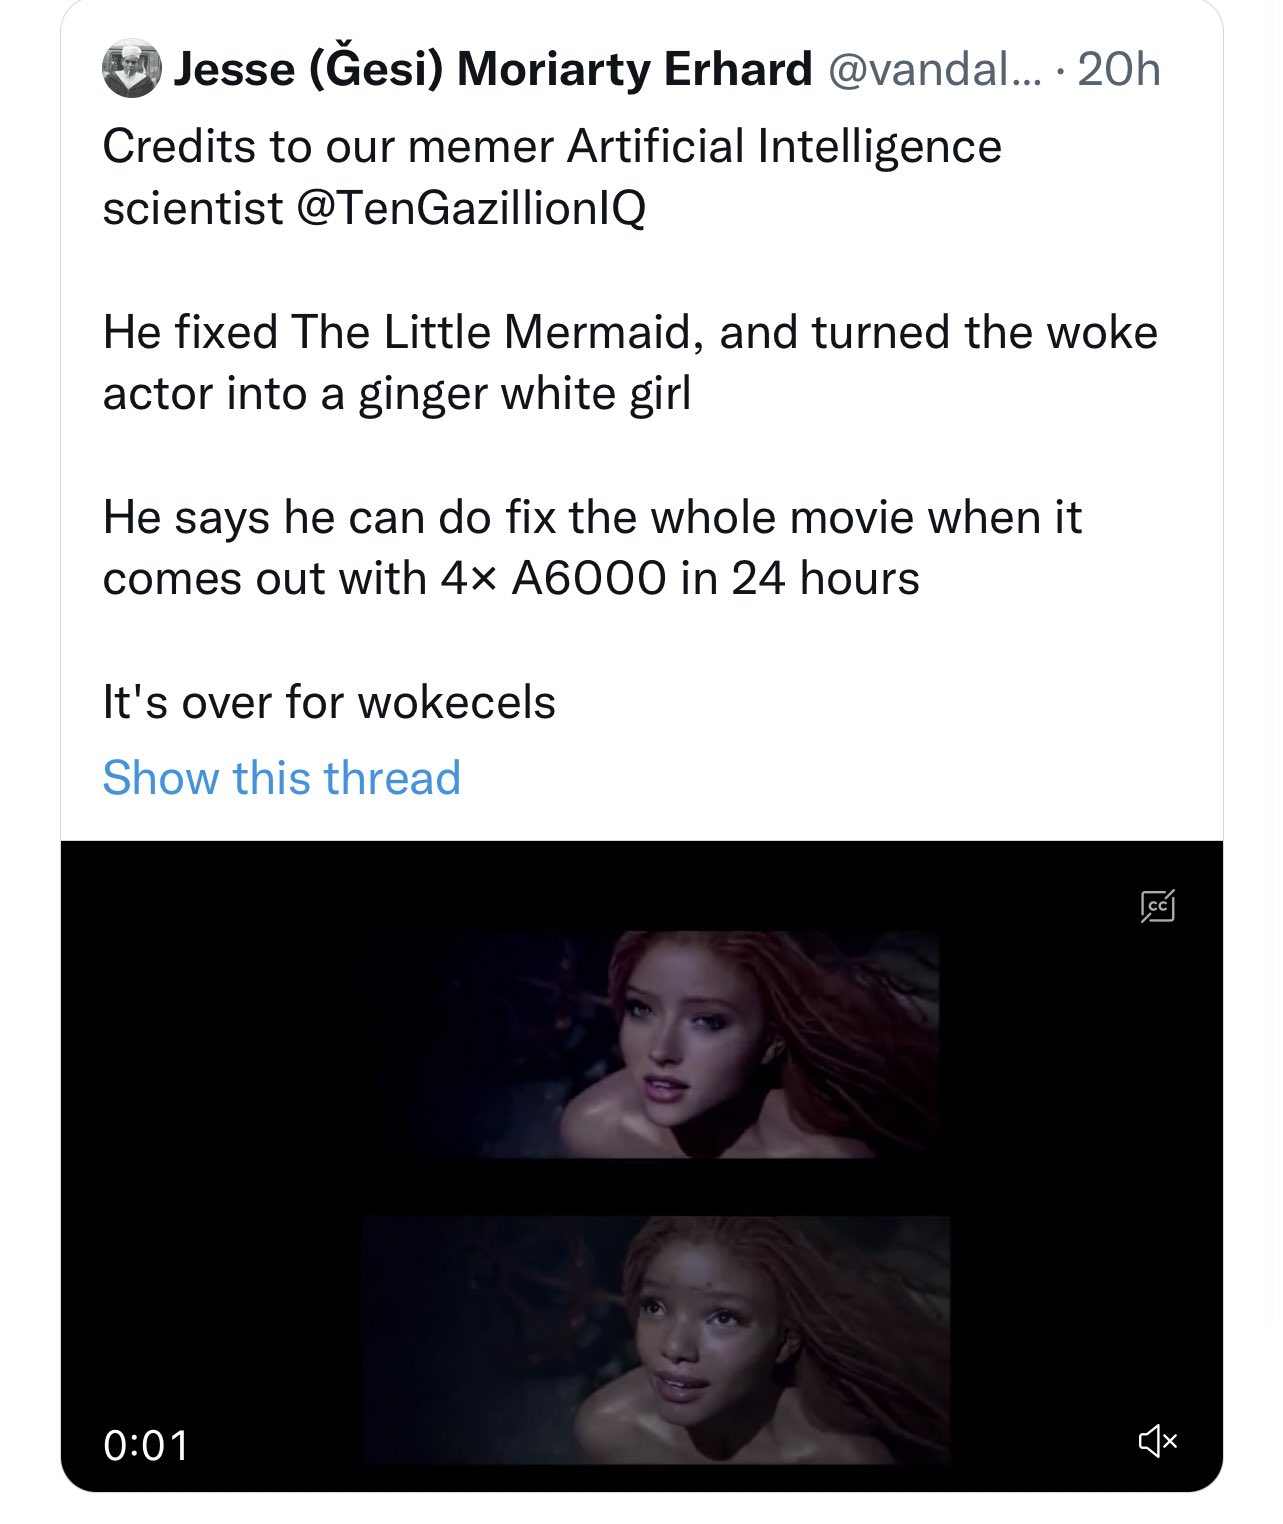 Racists Plan To Digitally Replace 'Little Mermaid' With White Actress